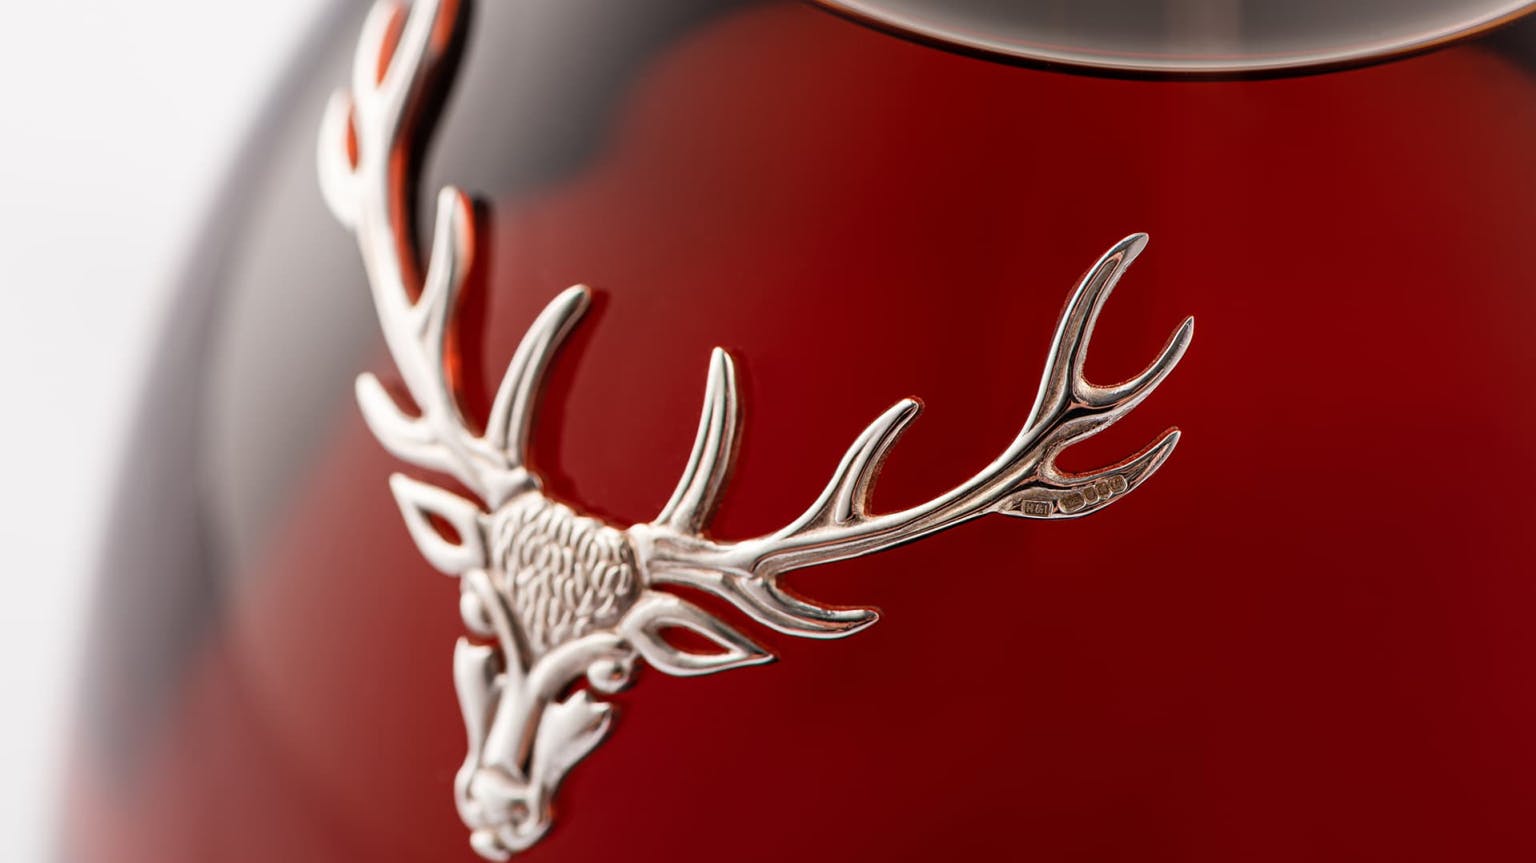 Everything you need to know about The Dalmore